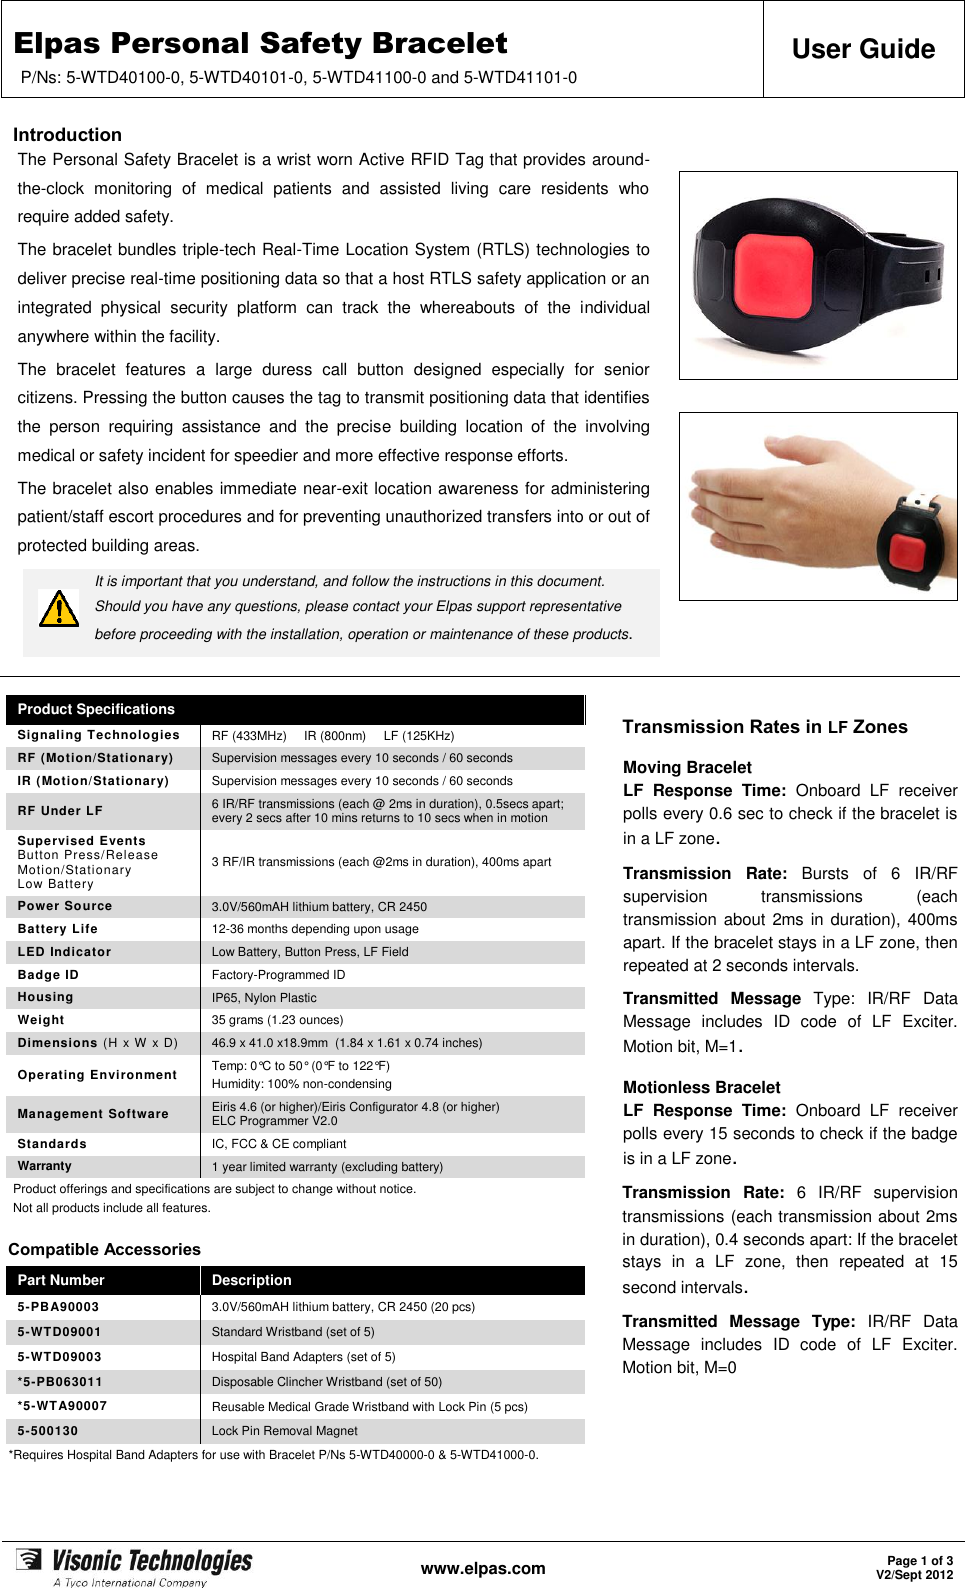 Elpas Personal Safety Bracelet P/Ns: 5-WTD40100-0, 5-WTD40101-0, 5-WTD41100-0 and 5-WTD41101-0 User Guide   www.elpas.com Page 1 of 3 V2/Sept 2012  Introduction The Personal Safety Bracelet is a wrist worn Active RFID Tag that provides around-the-clock  monitoring  of  medical  patients  and  assisted  living  care  residents  who require added safety. The bracelet bundles triple-tech Real-Time Location System (RTLS) technologies to deliver precise real-time positioning data so that a host RTLS safety application or an integrated  physical  security  platform  can  track  the  whereabouts  of  the  individual anywhere within the facility. The  bracelet  features  a  large  duress  call  button  designed  especially  for  senior citizens. Pressing the button causes the tag to transmit positioning data that identifies the  person  requiring  assistance  and  the  precise  building  location  of  the  involving medical or safety incident for speedier and more effective response efforts. The bracelet also enables immediate near-exit location awareness for administering patient/staff escort procedures and for preventing unauthorized transfers into or out of protected building areas.  It is important that you understand, and follow the instructions in this document.  Should you have any questions, please contact your Elpas support representative before proceeding with the installation, operation or maintenance of these products.           Product Specifications Transmission Rates in LF Zones Moving Bracelet LF  Response  Time:  Onboard  LF  receiver polls every 0.6 sec to check if the bracelet is in a LF zone. Transmission  Rate:  Bursts  of  6  IR/RF supervision  transmissions  (each transmission about 2ms in duration), 400ms apart. If the bracelet stays in a LF zone, then repeated at 2 seconds intervals. Transmitted  Message  Type:  IR/RF  Data Message  includes  ID  code  of  LF  Exciter. Motion bit, M=1. Motionless Bracelet LF  Response  Time:  Onboard  LF  receiver polls every 15 seconds to check if the badge is in a LF zone. Transmission  Rate:  6  IR/RF  supervision transmissions (each transmission about 2ms in duration), 0.4 seconds apart: If the bracelet stays  in  a  LF  zone,  then  repeated  at  15 second intervals. Transmitted  Message  Type:  IR/RF  Data Message  includes  ID  code  of  LF  Exciter. Motion bit, M=0 Signaling Technologies RF (433MHz)     IR (800nm)     LF (125KHz) RF (Motion/Stationary) Supervision messages every 10 seconds / 60 seconds IR (Motion/Stationary) Supervision messages every 10 seconds / 60 seconds RF Under LF 6 IR/RF transmissions (each @ 2ms in duration), 0.5secs apart; every 2 secs after 10 mins returns to 10 secs when in motion Supervised Events Button Press/Release Motion/Stationary Low Battery 3 RF/IR transmissions (each @2ms in duration), 400ms apart Power Source 3.0V/560mAH lithium battery, CR 2450 Battery Life 12-36 months depending upon usage LED Indicator Low Battery, Button Press, LF Field Badge ID Factory-Programmed ID Housing IP65, Nylon Plastic Weight 35 grams (1.23 ounces) Dimensions (H x W x D) 46.9 x 41.0 x18.9mm  (1.84 x 1.61 x 0.74 inches) Operating Environment Temp: 0°C to 50° (0°F to 122°F) Humidity: 100% non-condensing Management Software Eiris 4.6 (or higher)/Eiris Configurator 4.8 (or higher) ELC Programmer V2.0 Standards IC, FCC &amp; CE compliant Warranty 1 year limited warranty (excluding battery) Product offerings and specifications are subject to change without notice. Not all products include all features. Compatible Accessories Part Number Description 5-PBA90003 3.0V/560mAH lithium battery, CR 2450 (20 pcs) 5-WTD09001 Standard Wristband (set of 5) 5-WTD09003 Hospital Band Adapters (set of 5) *5-PB063011 Disposable Clincher Wristband (set of 50) *5-WTA90007 Reusable Medical Grade Wristband with Lock Pin (5 pcs) 5-500130 Lock Pin Removal Magnet *Requires Hospital Band Adapters for use with Bracelet P/Ns 5-WTD40000-0 &amp; 5-WTD41000-0.  